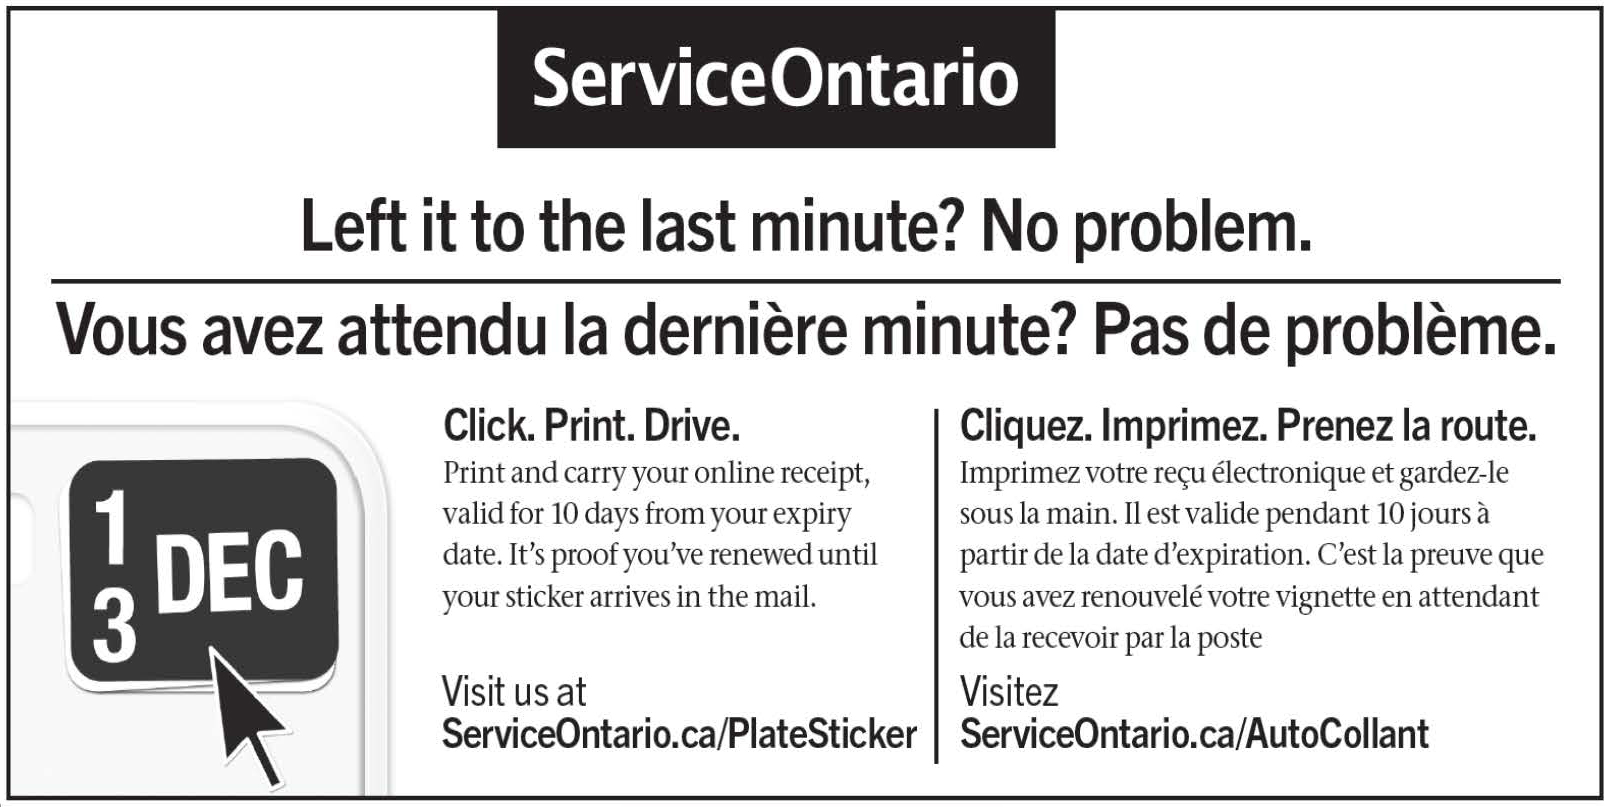 Above is a picture from the Service Ontario web site. The picture is of a Service Ontario advertisement indicating how to renew your plate stickers. It says “Left to the last minute? No problem. Click. Print. Drive. Print and carry your online receipt, valid for 10 days from your expiry date. It’s proof you’ve renewed until your sticker arrives in the mail. Visit us at serviceontario.ca/platesticker.”